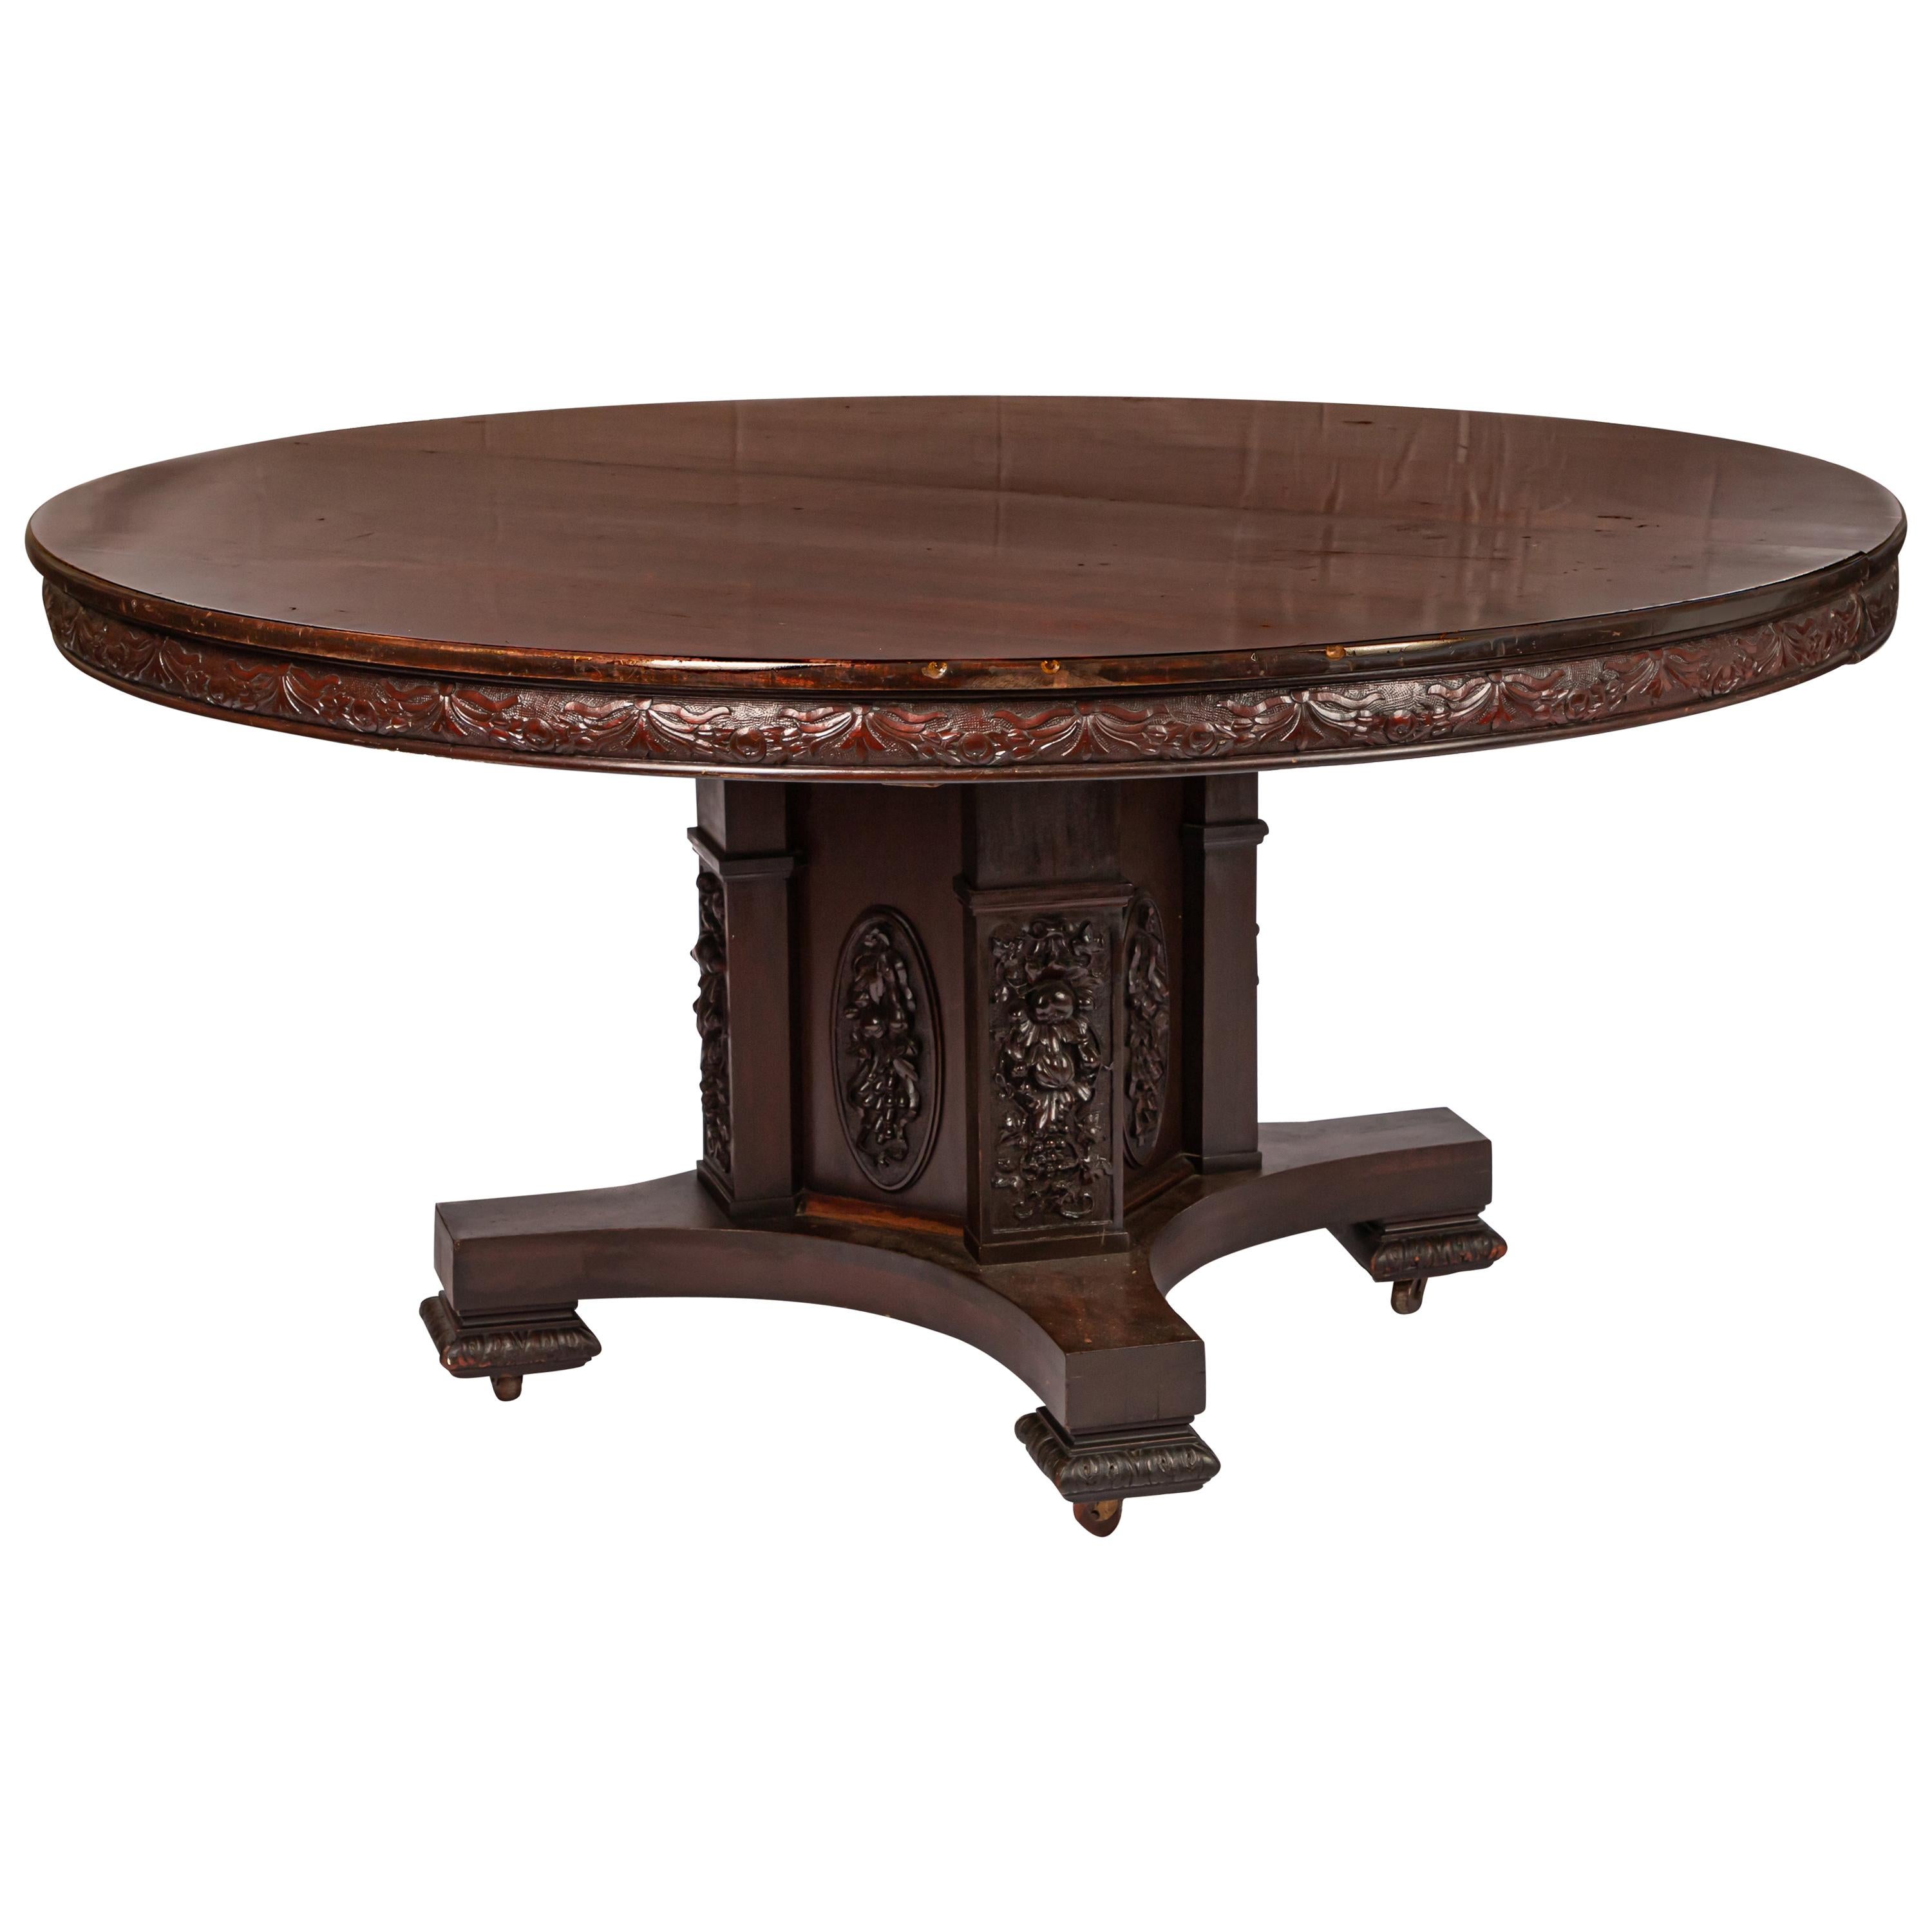 J Horner Round Dining Table For Sale